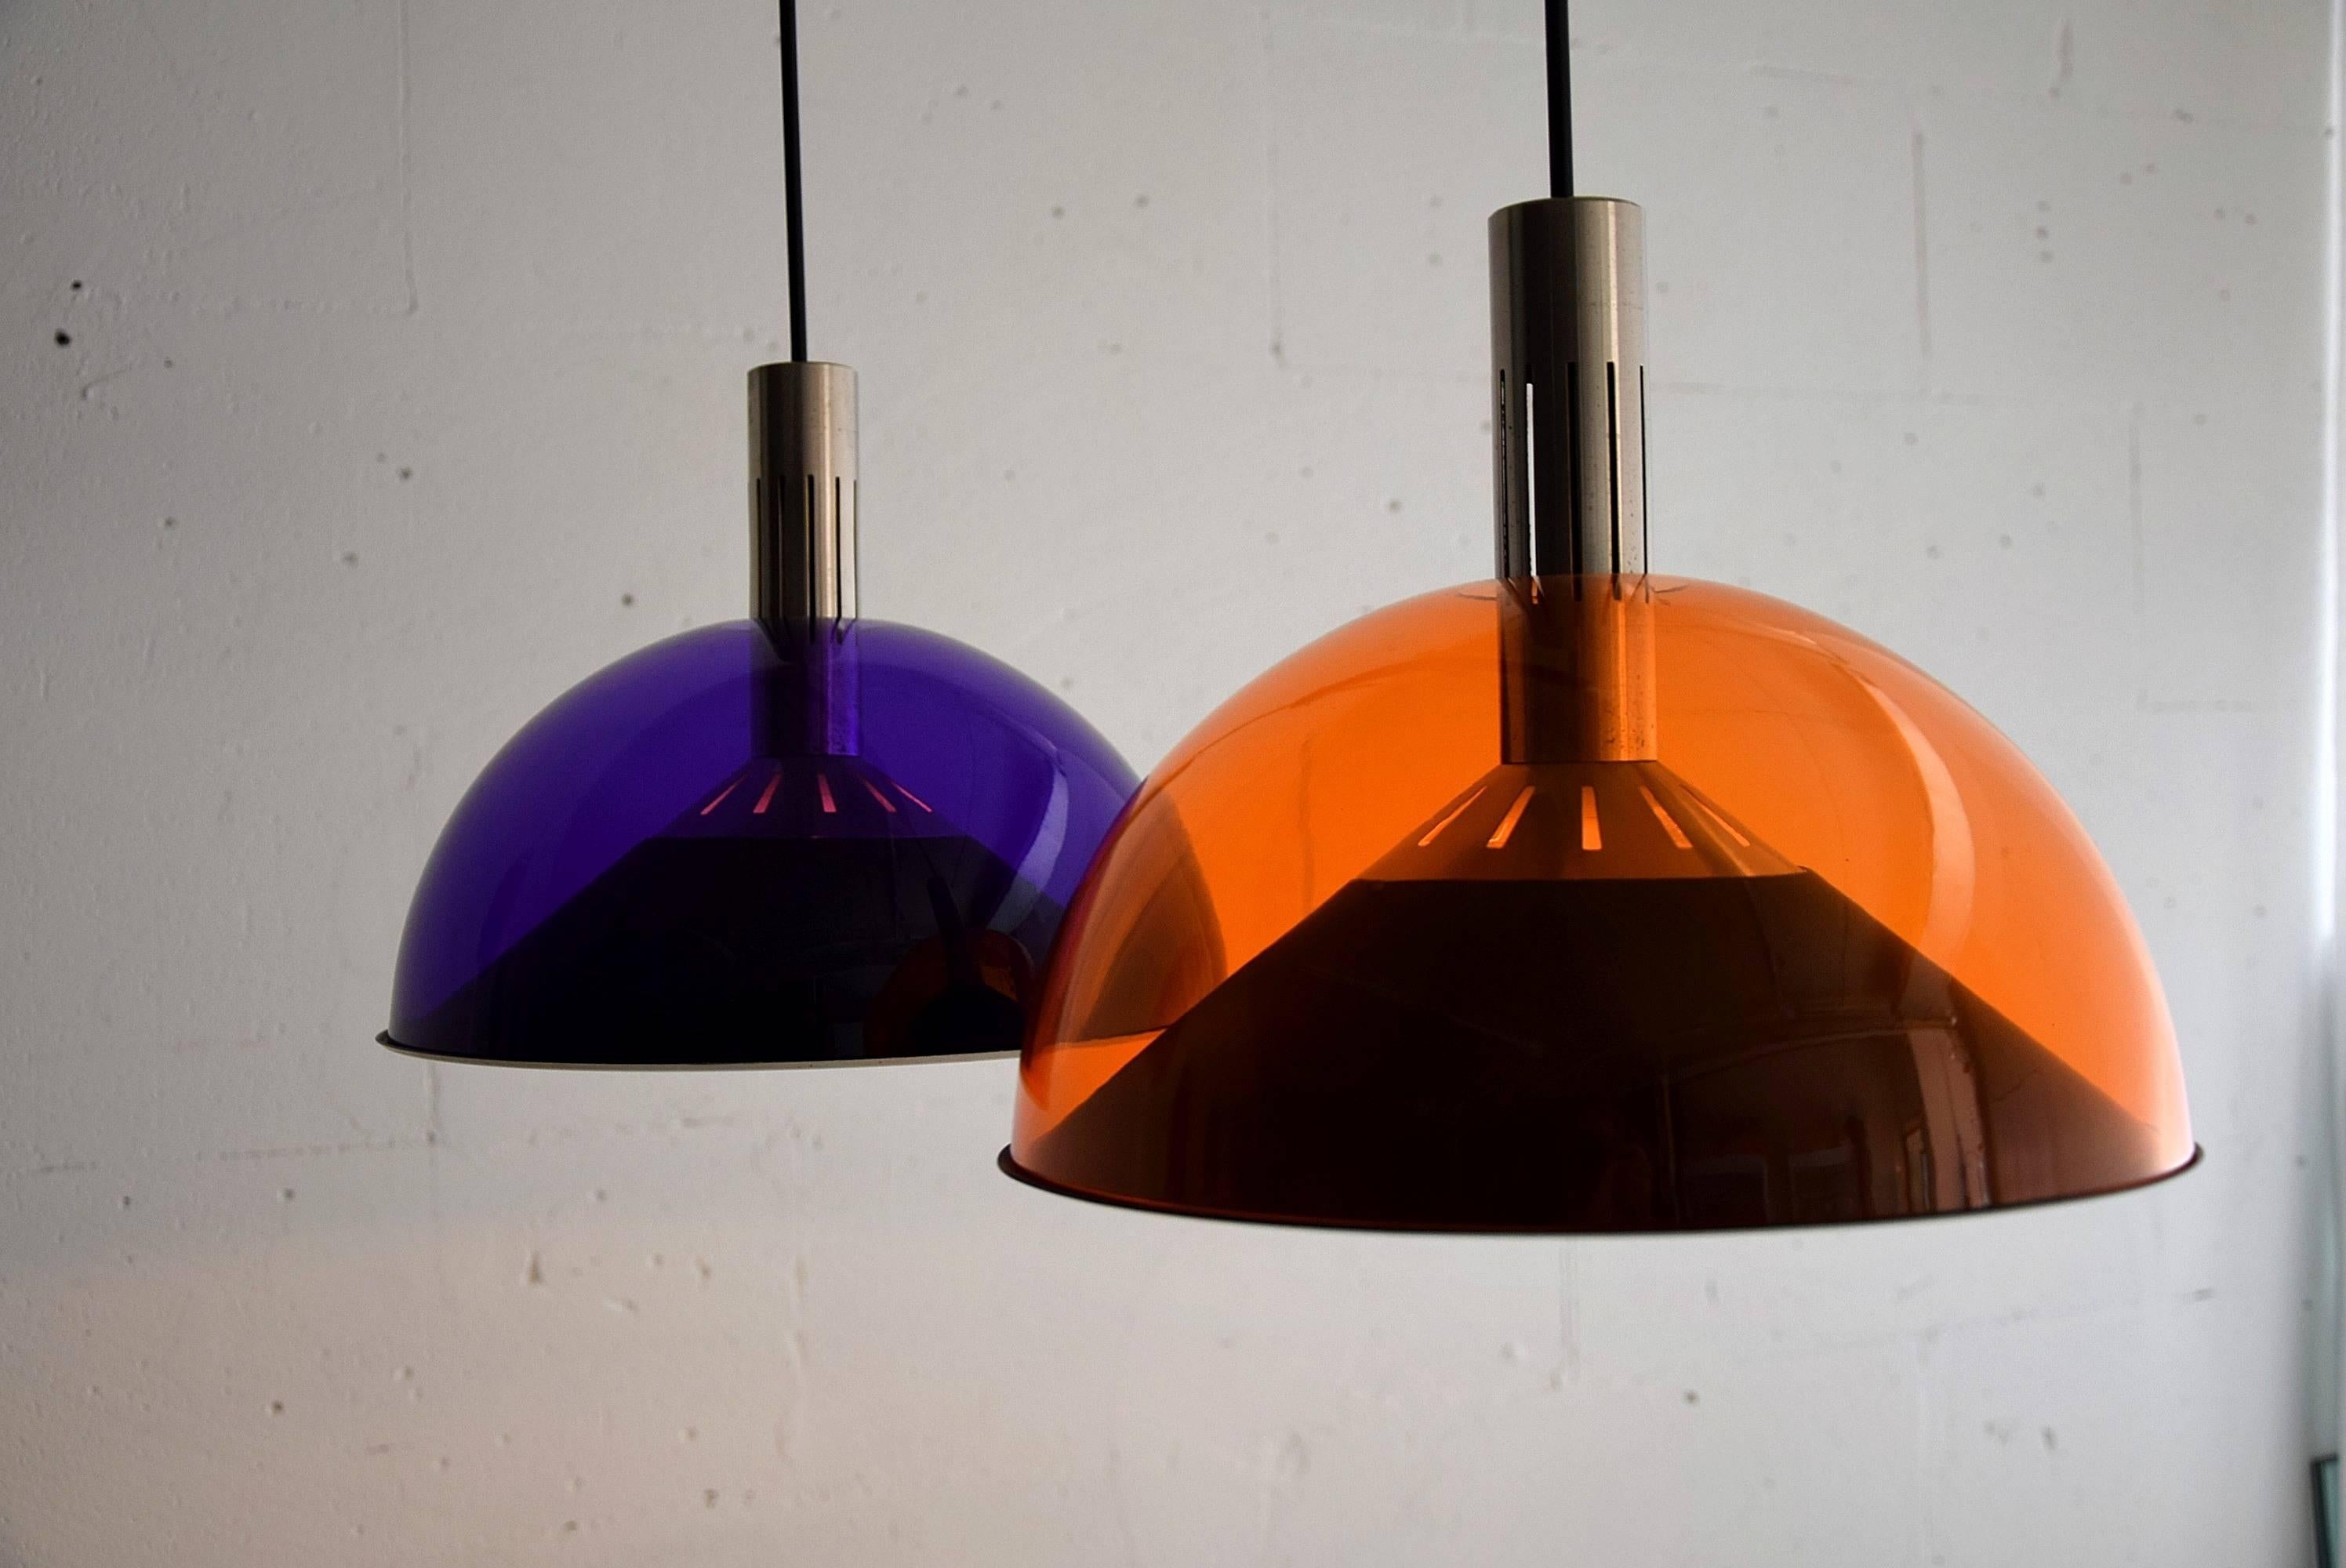 Mid-Century Modern Stilnovo ceiling lamp made of an orange and purple acrylic shade icm with teakwood, stainless steel and black painted iron.
The shades can be adjusted separately in height.
The lamp will be shipped in a custom made wooden crate.